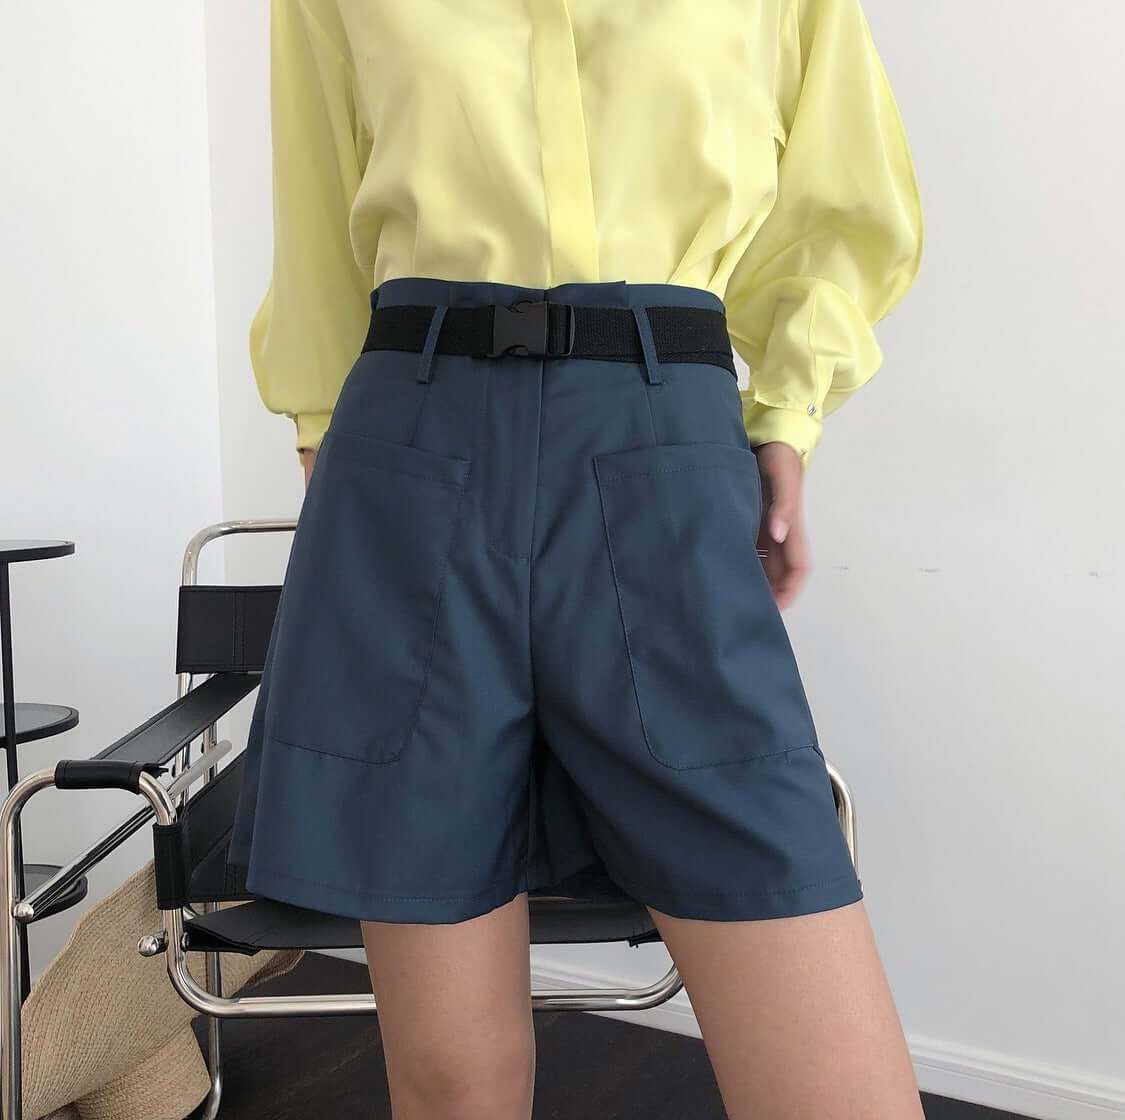 Long legs single product summer new hipster high waist straight shorts loose slime display high casual belt wide pants female